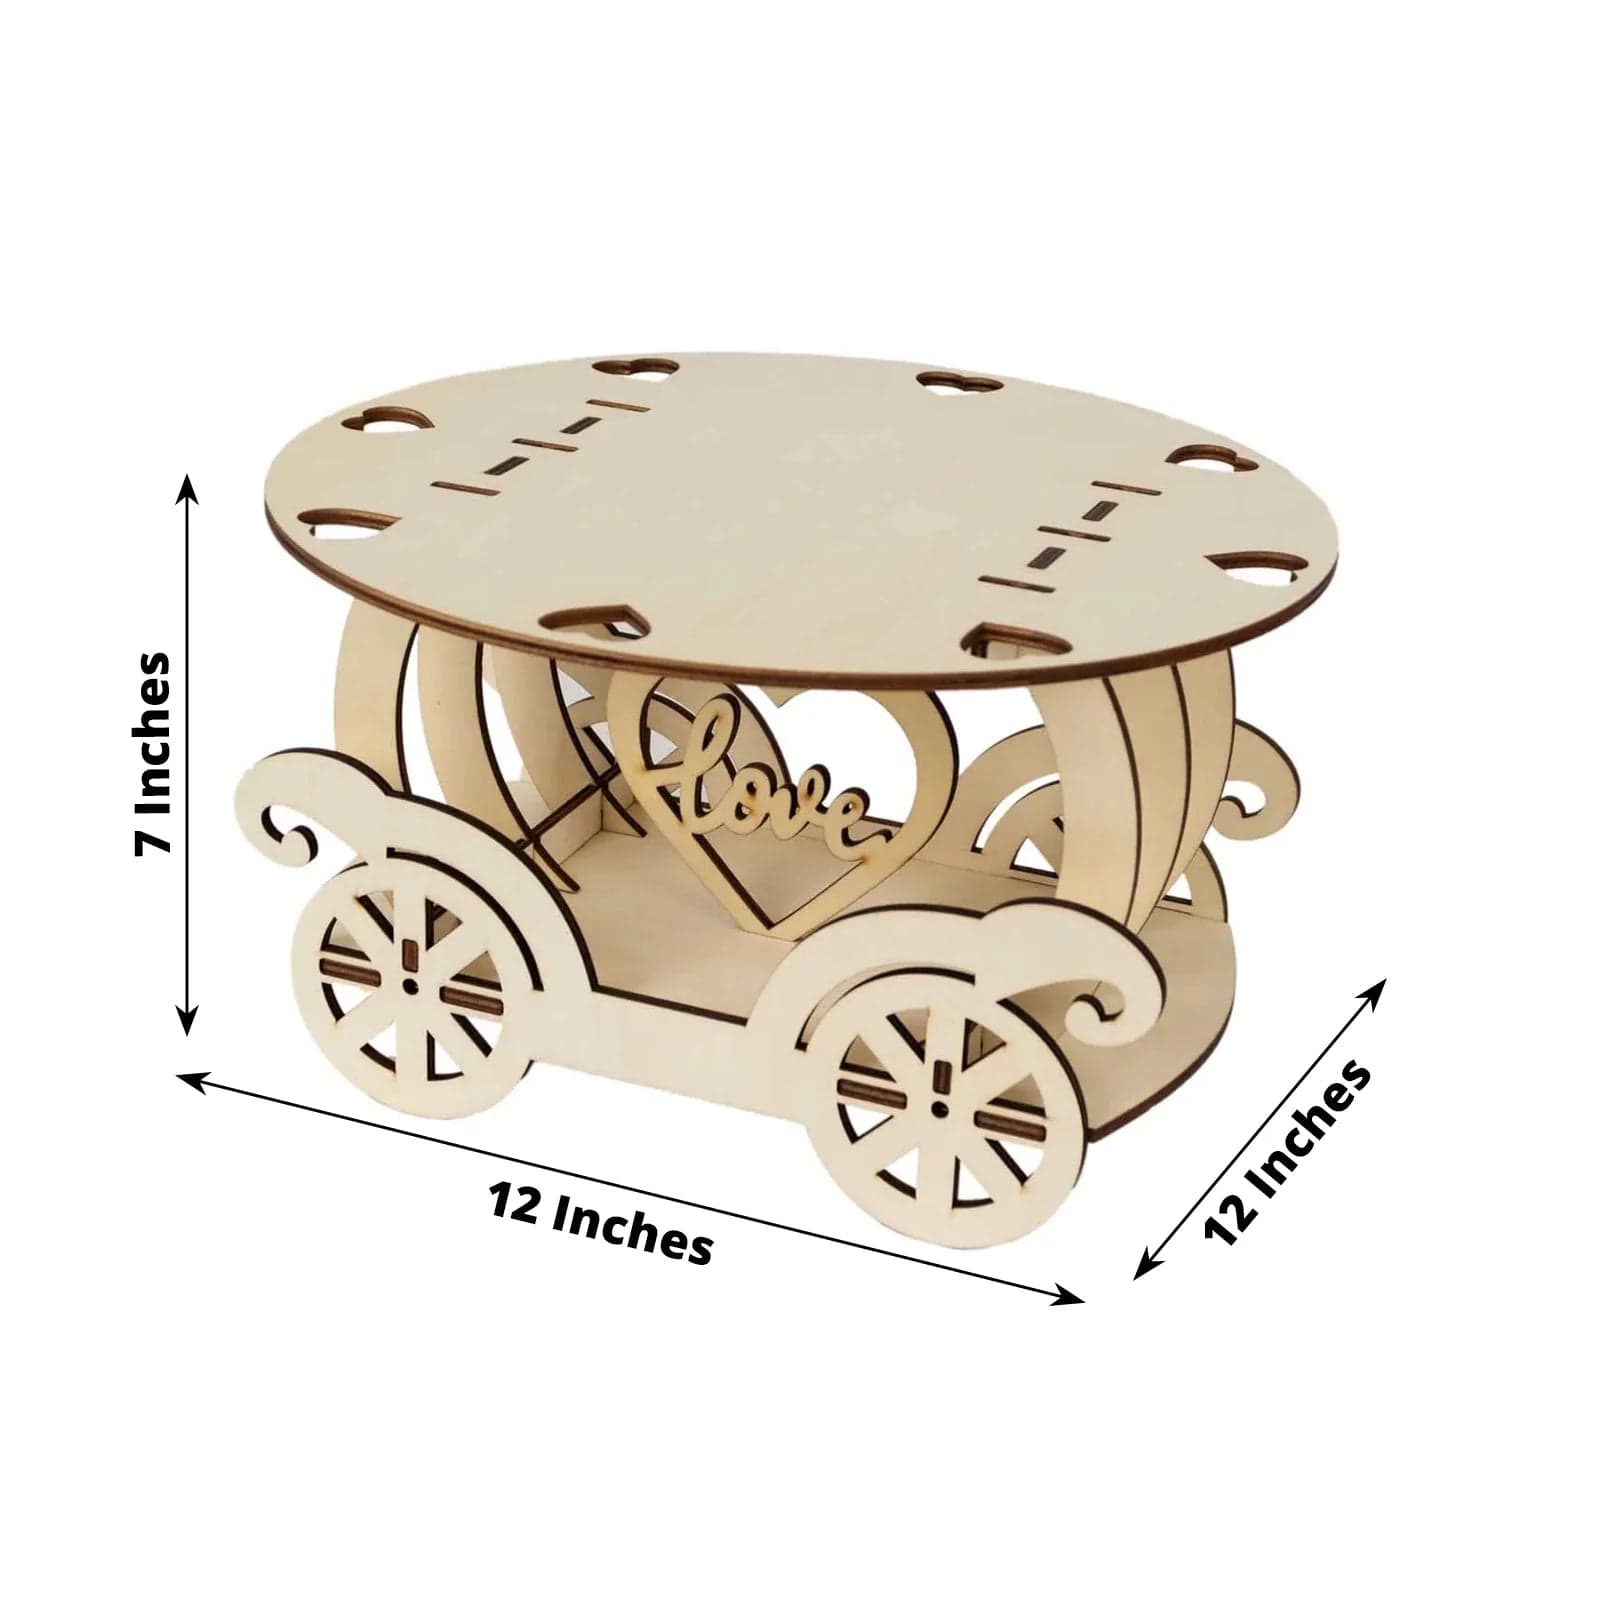 12 in Natural Wooden Carriage Wedding Cake Stand